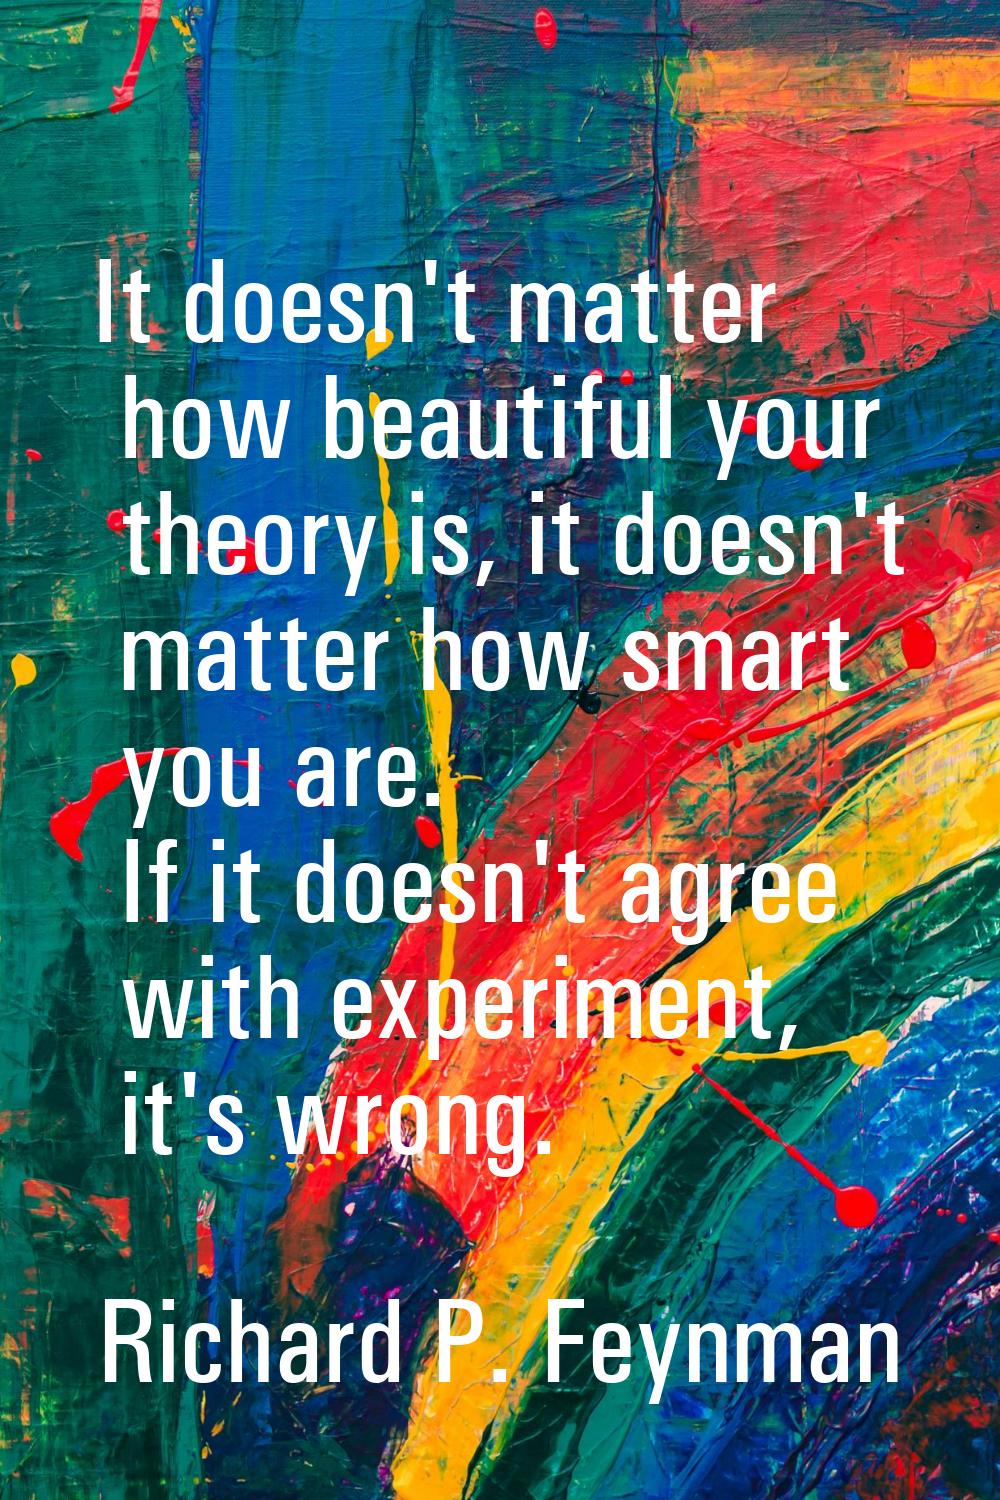 It doesn't matter how beautiful your theory is, it doesn't matter how smart you are. If it doesn't 